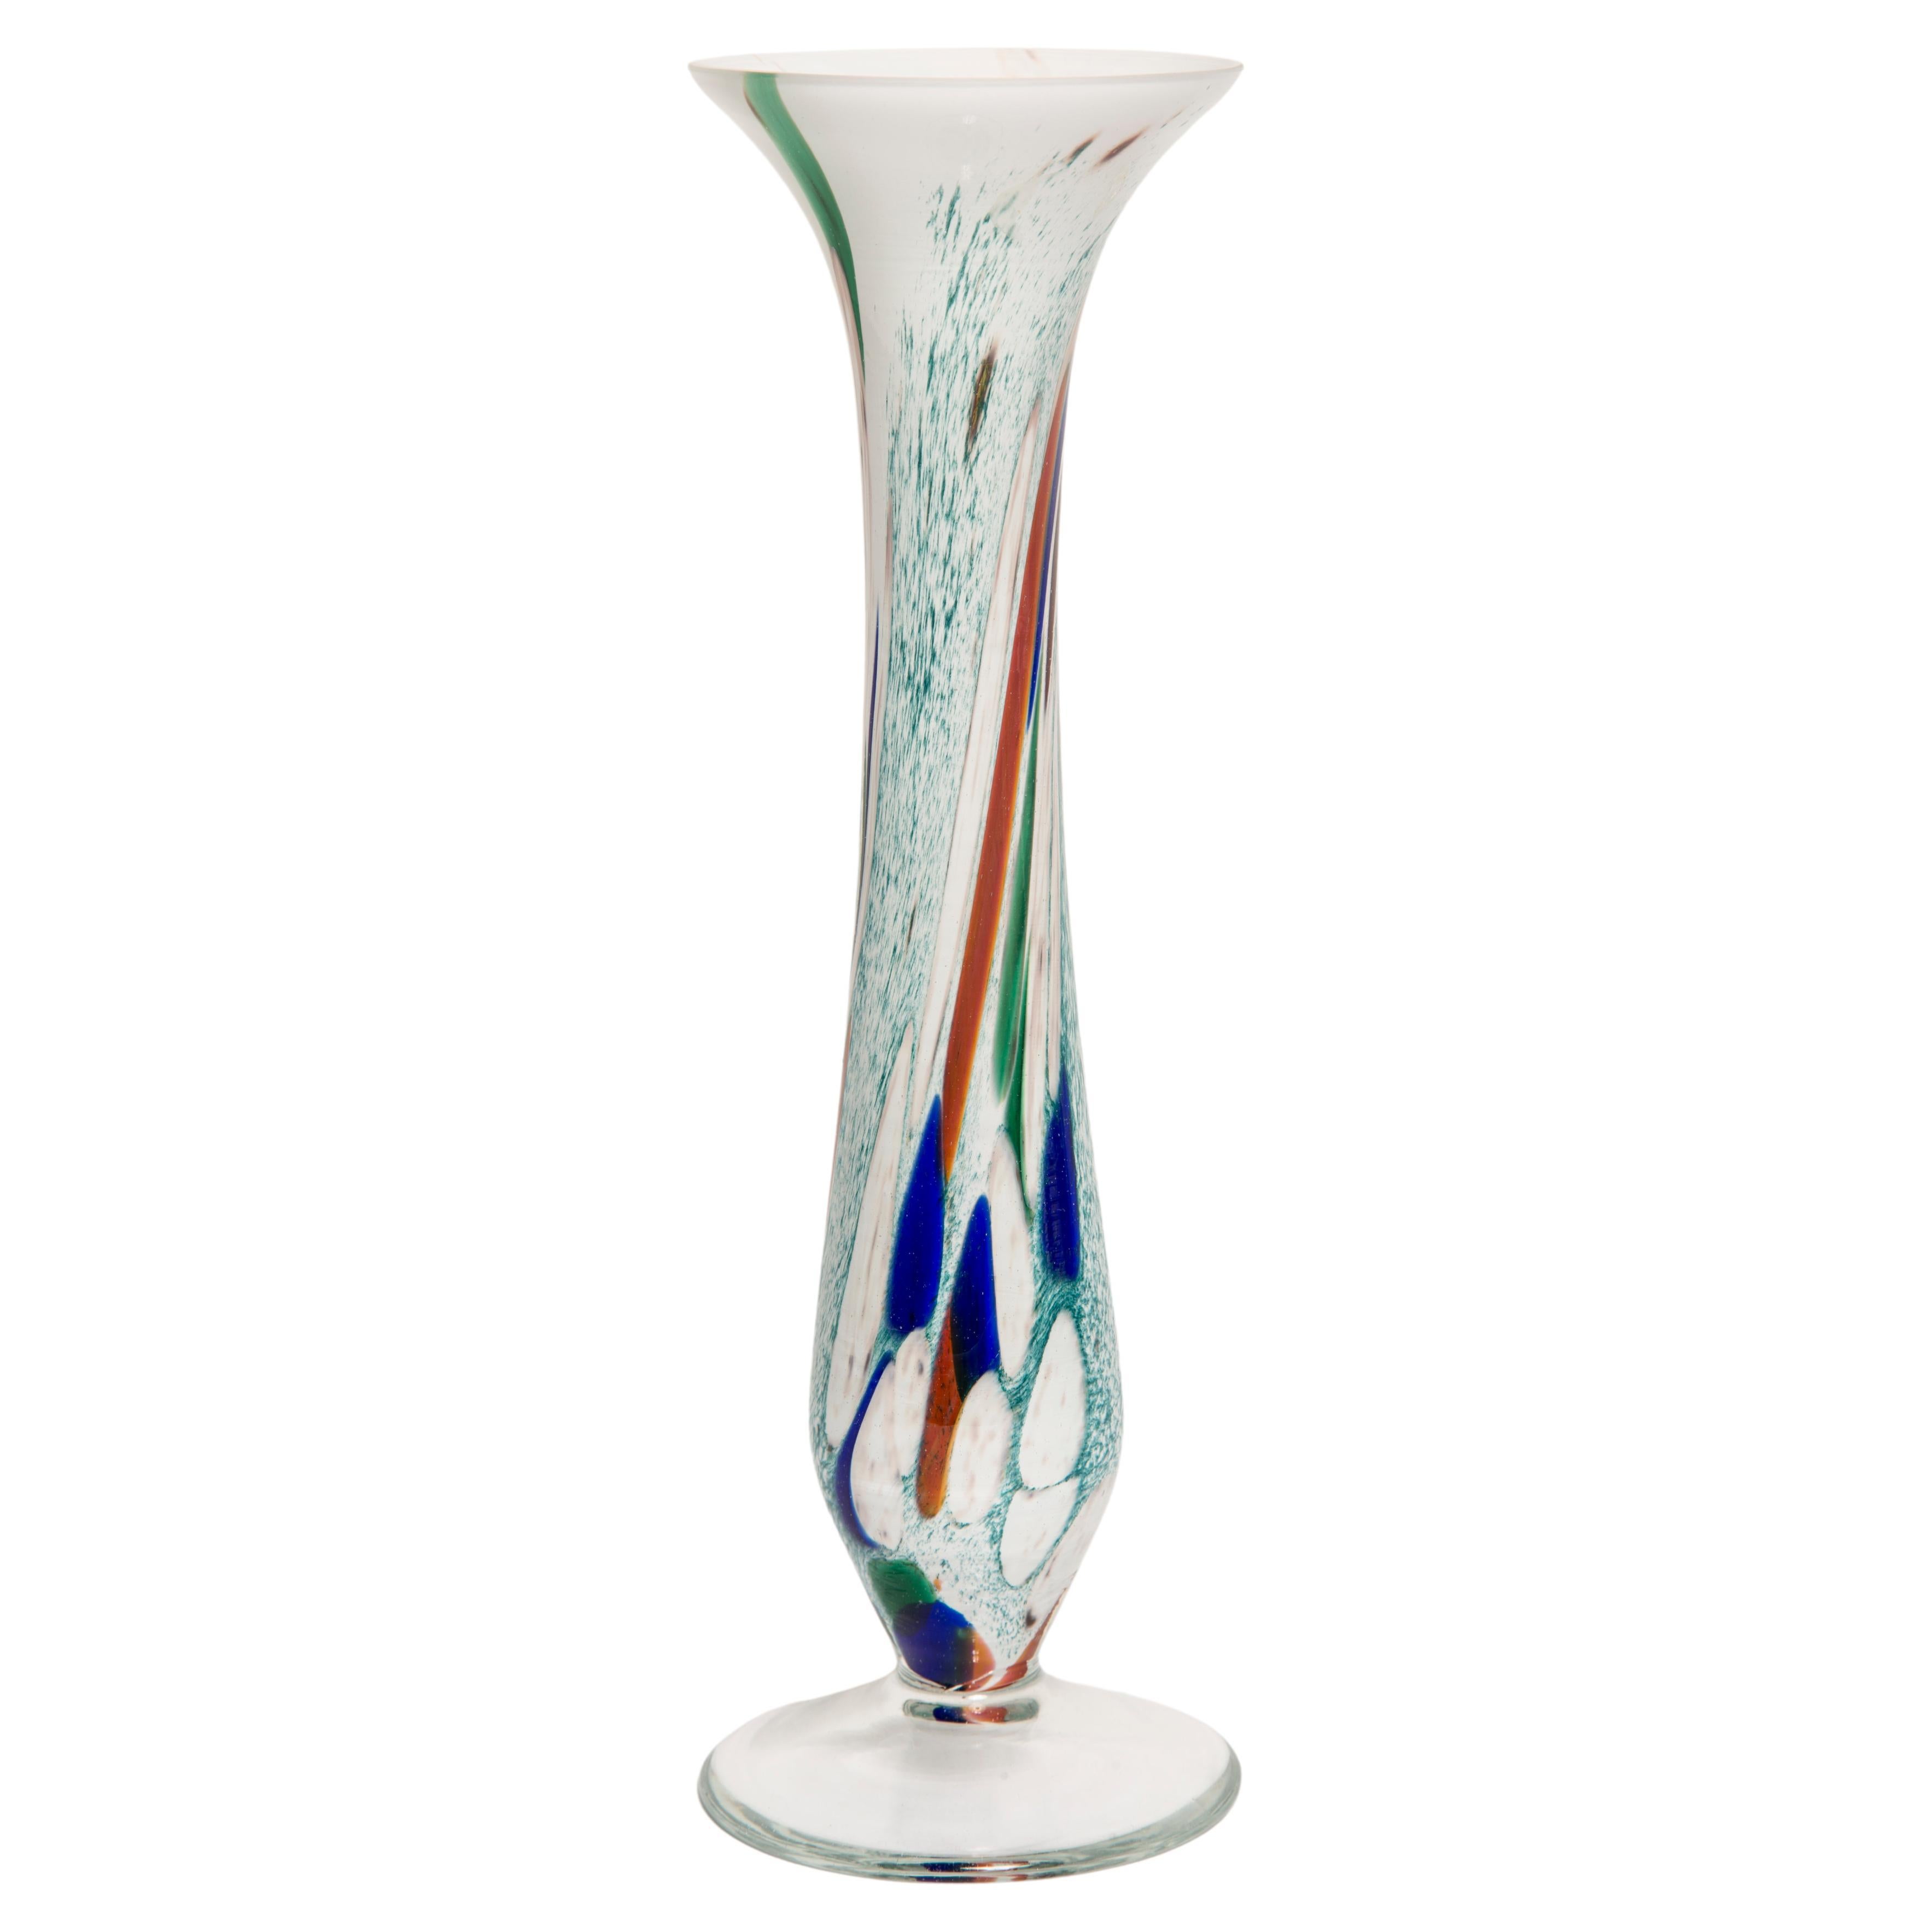 Midcentury Vintage White and Blue Slim Murano Vase, Italy, 1960s For Sale